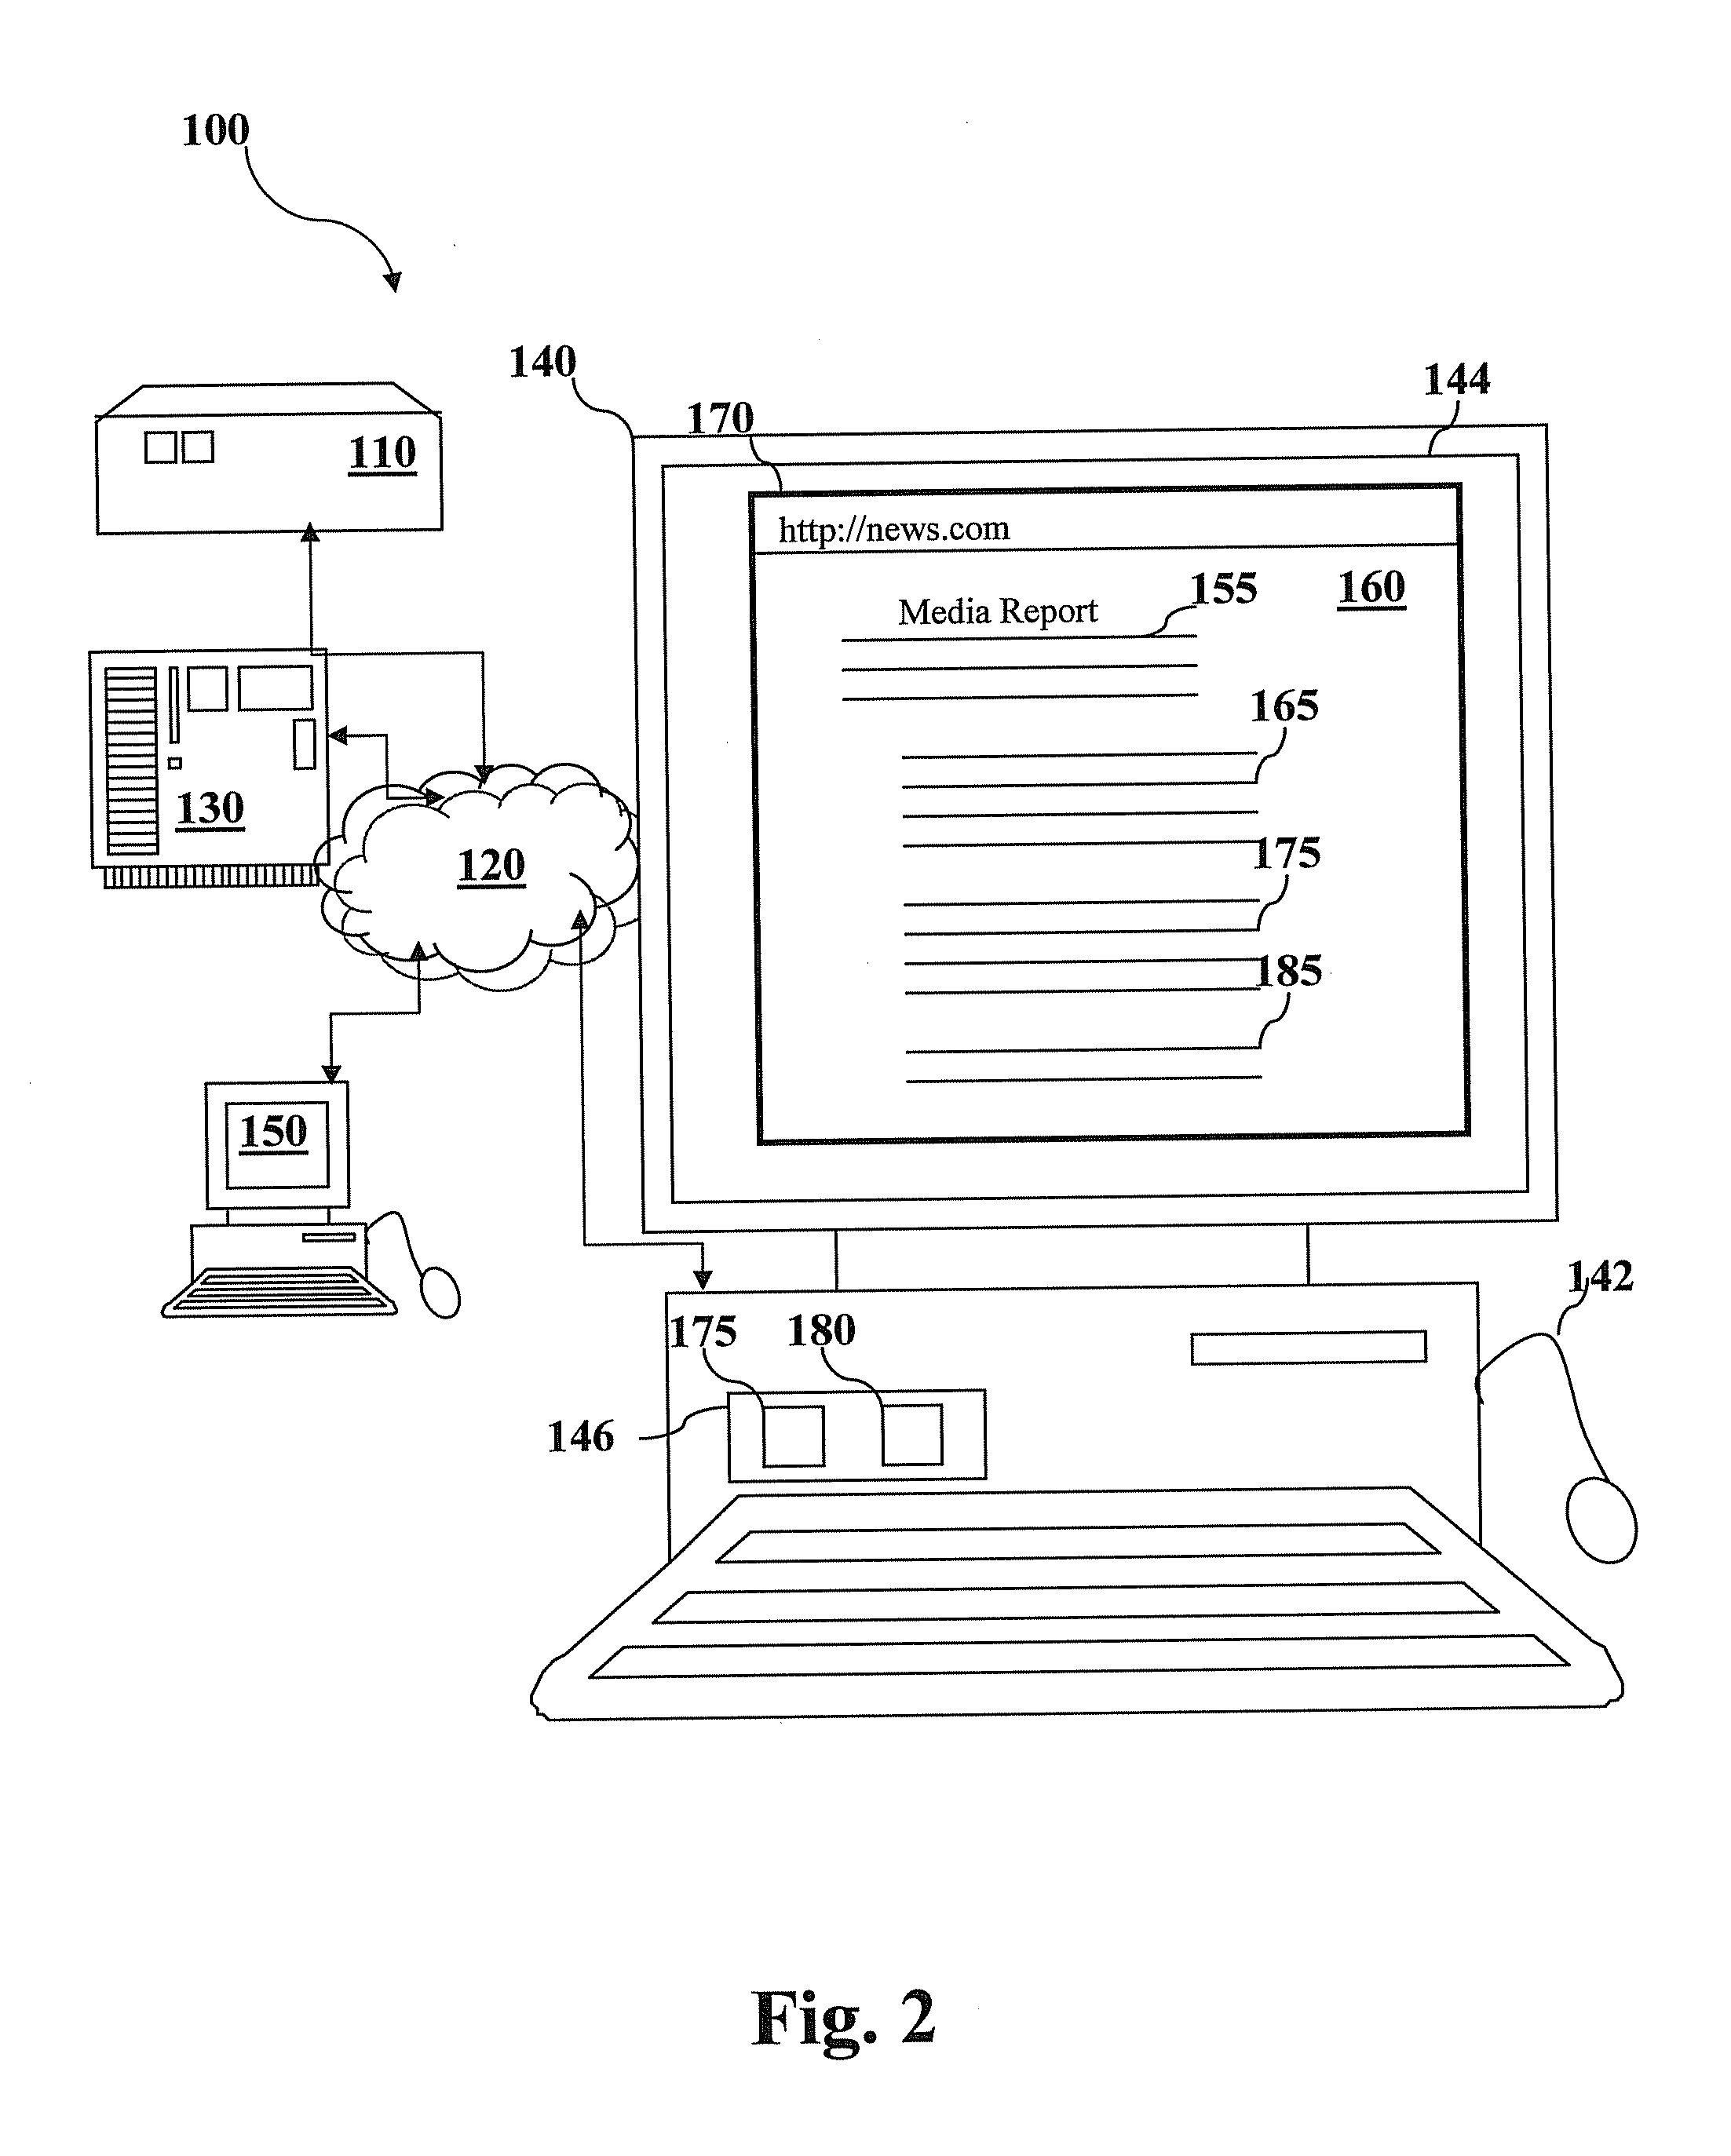 System and method for coordinating simultaneous edits of shared digital data